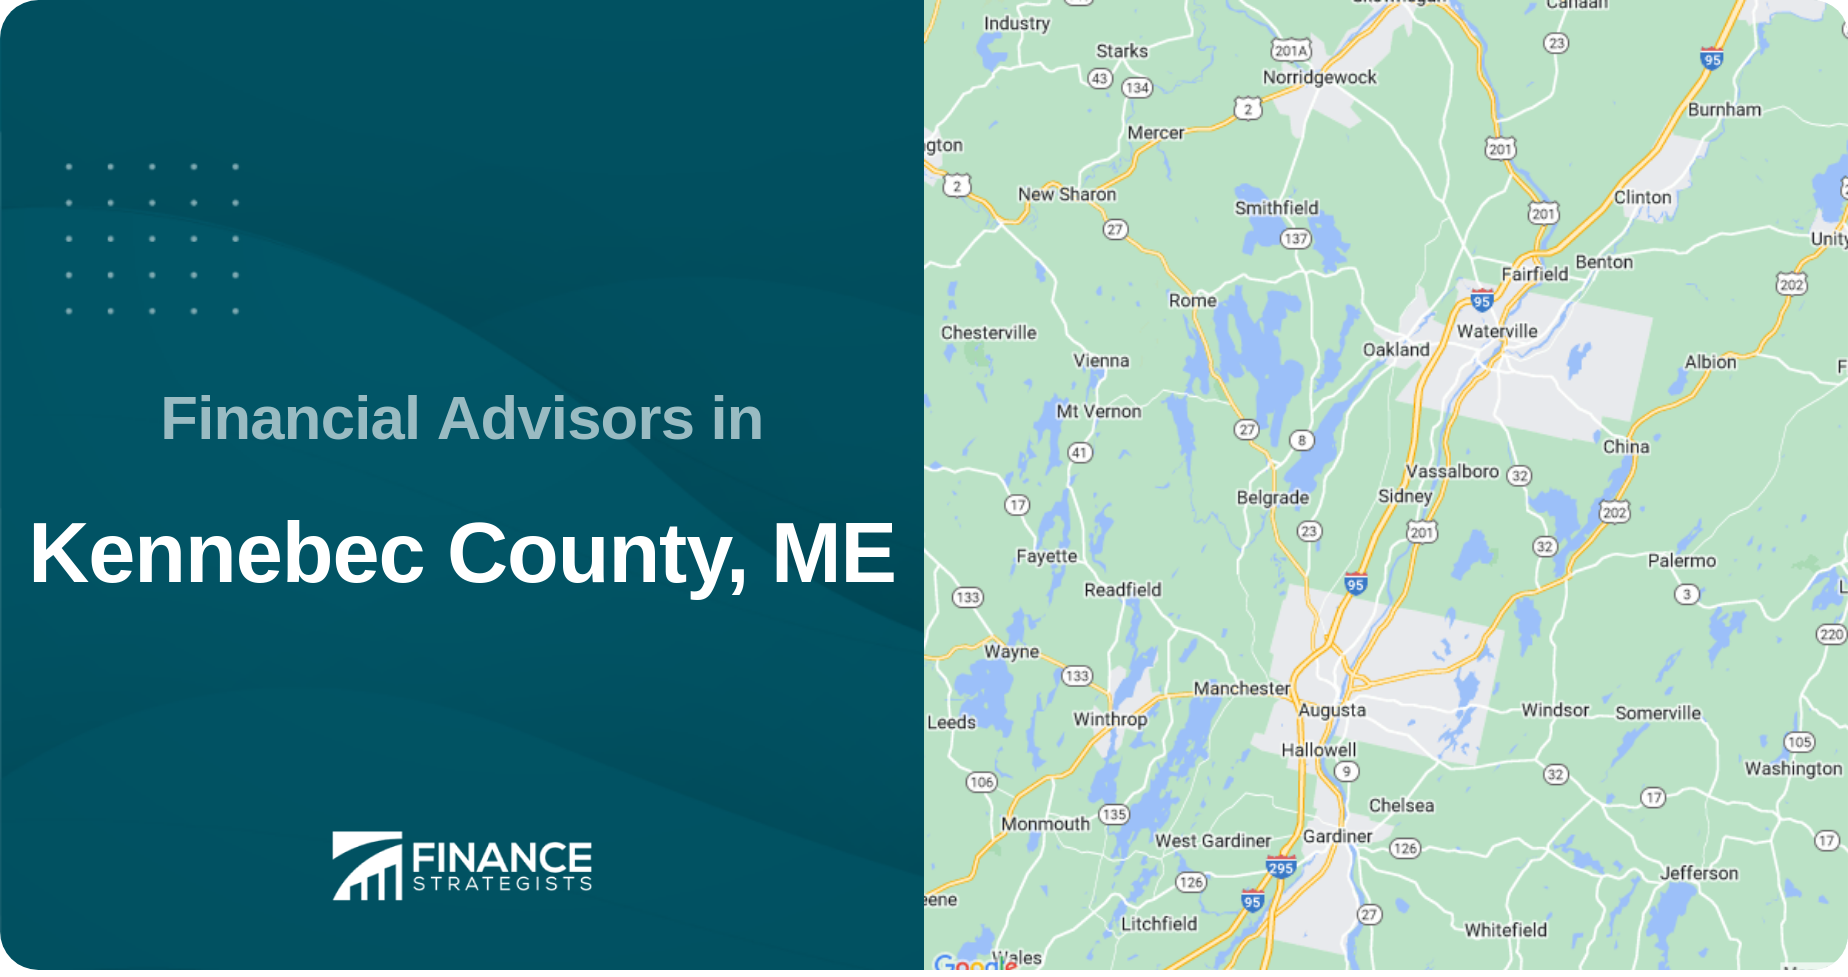 Financial Advisors in Kennebec County, ME